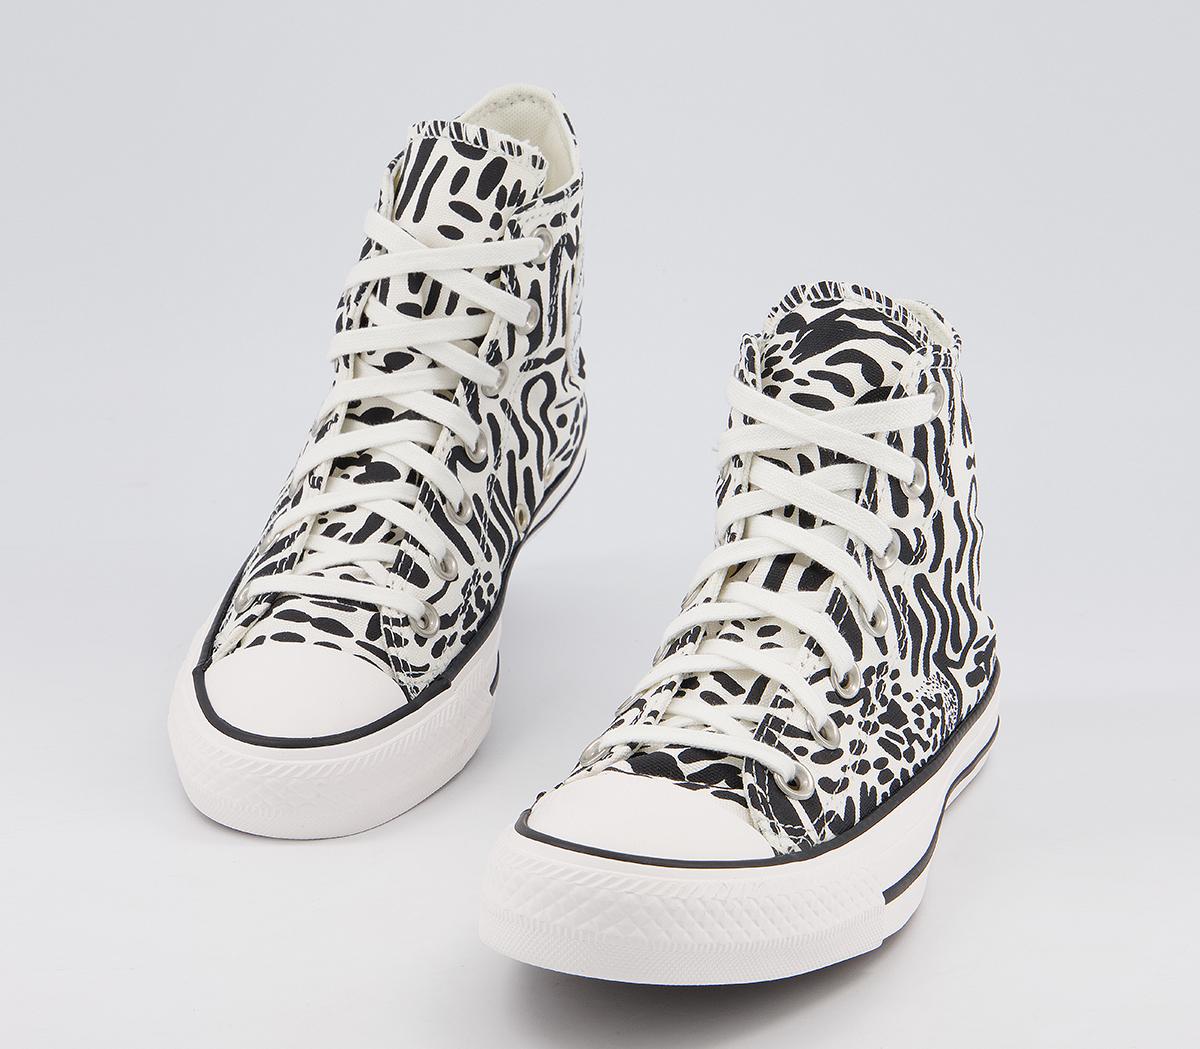 Converse All Star Hi Trainers Egret Black Egret Animal - Hers trainers